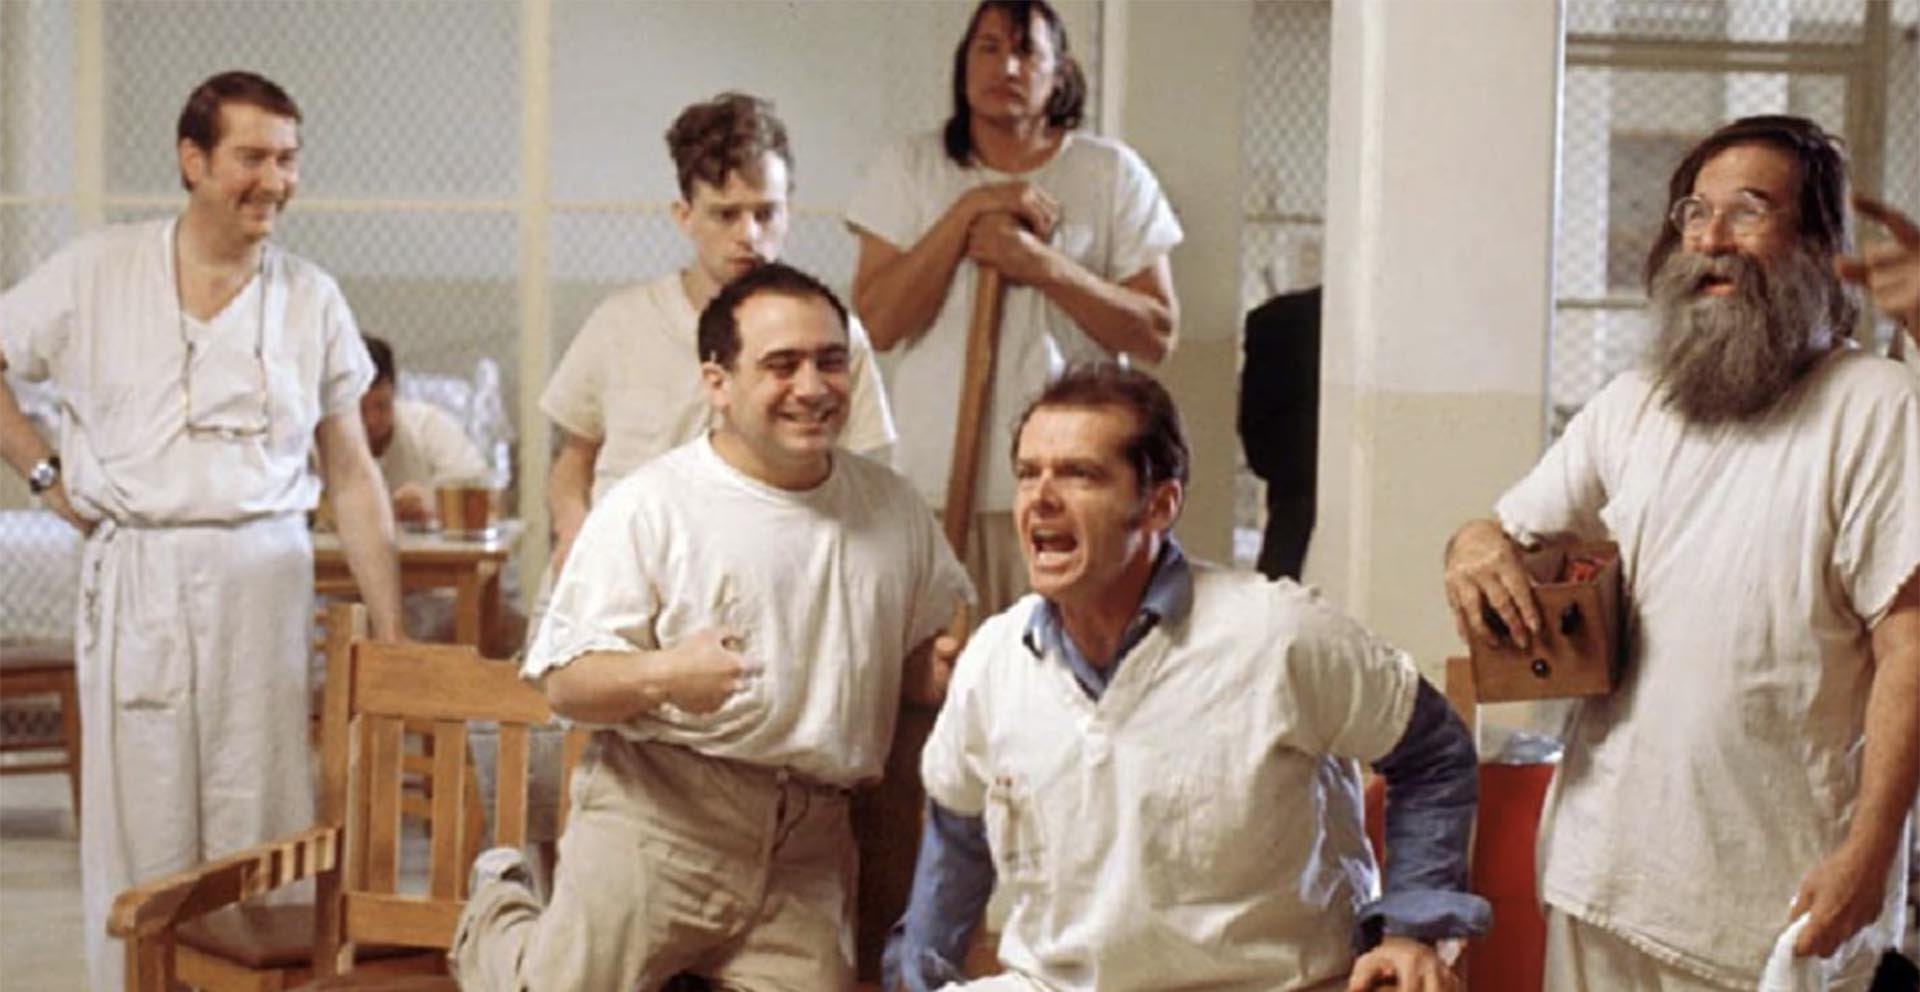 still off "One flew over the cuckoo's nest"